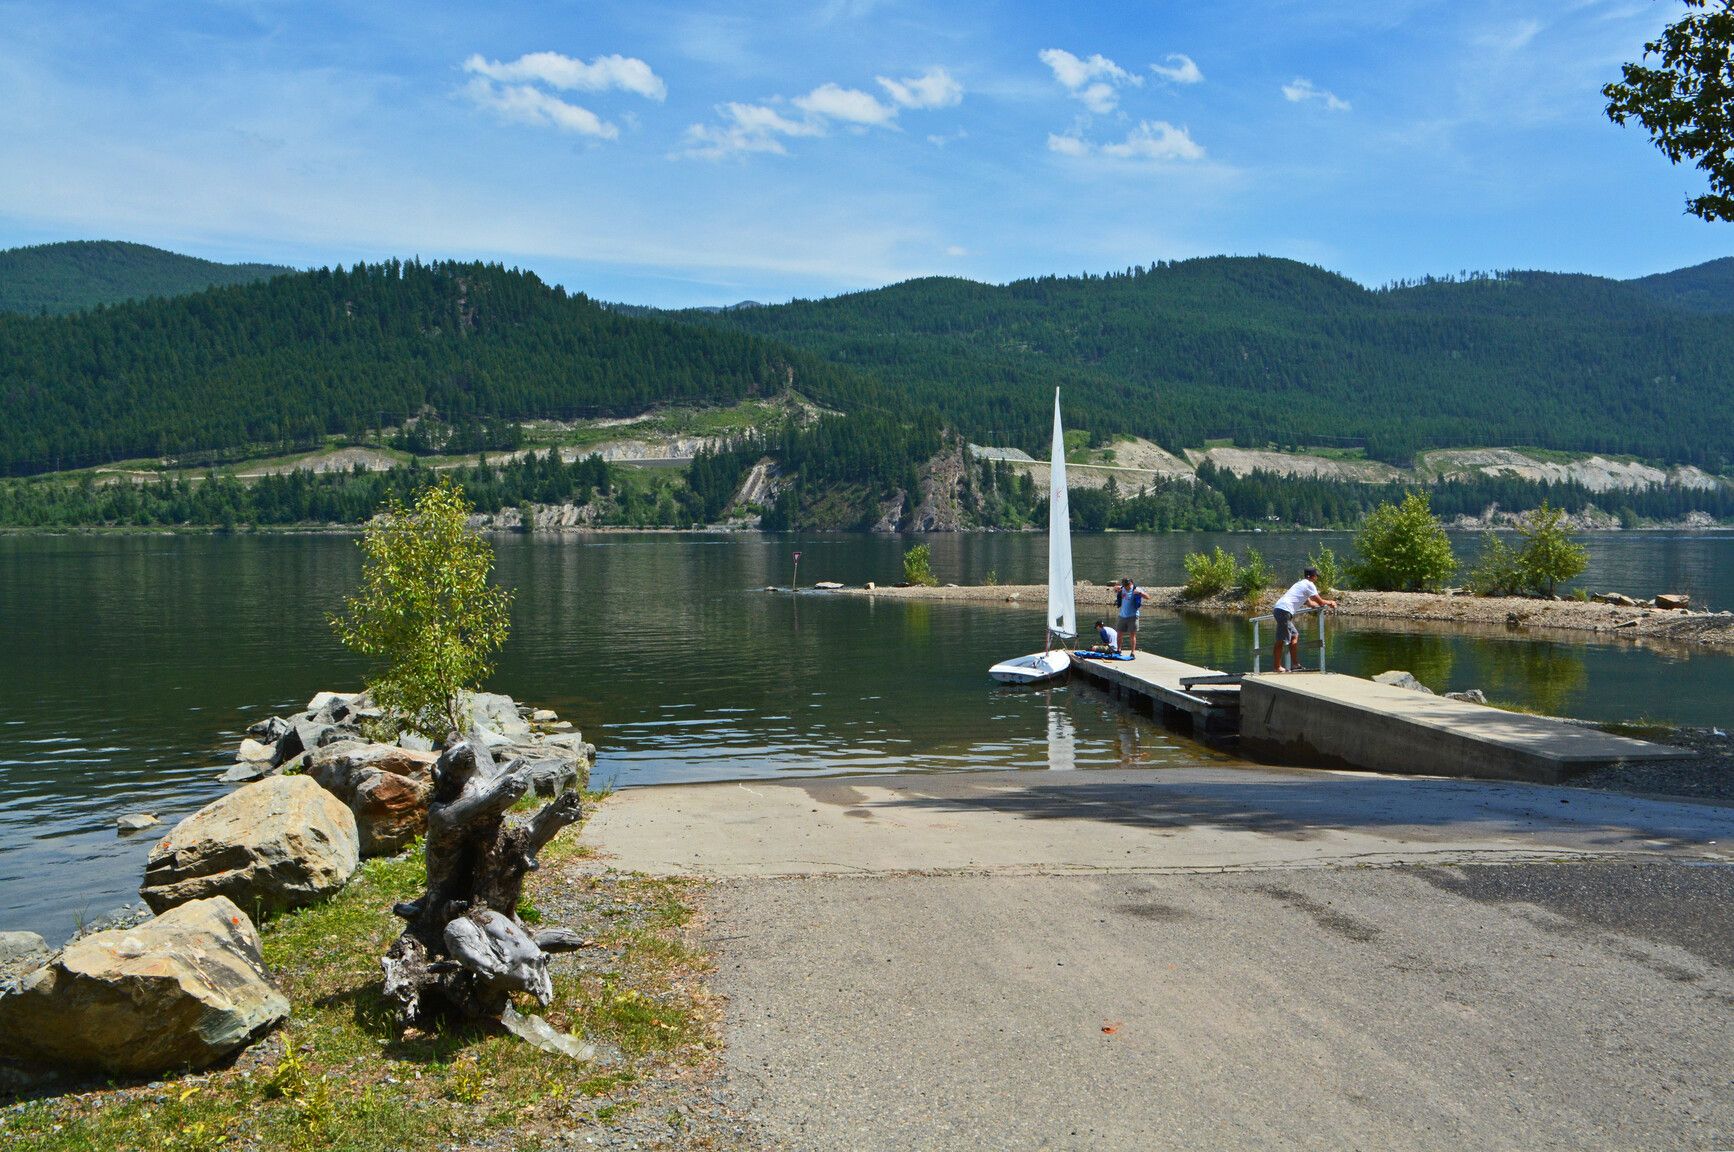 On the dock, boaters get ready for a relaxing sailboat ride on Moyie Lake.